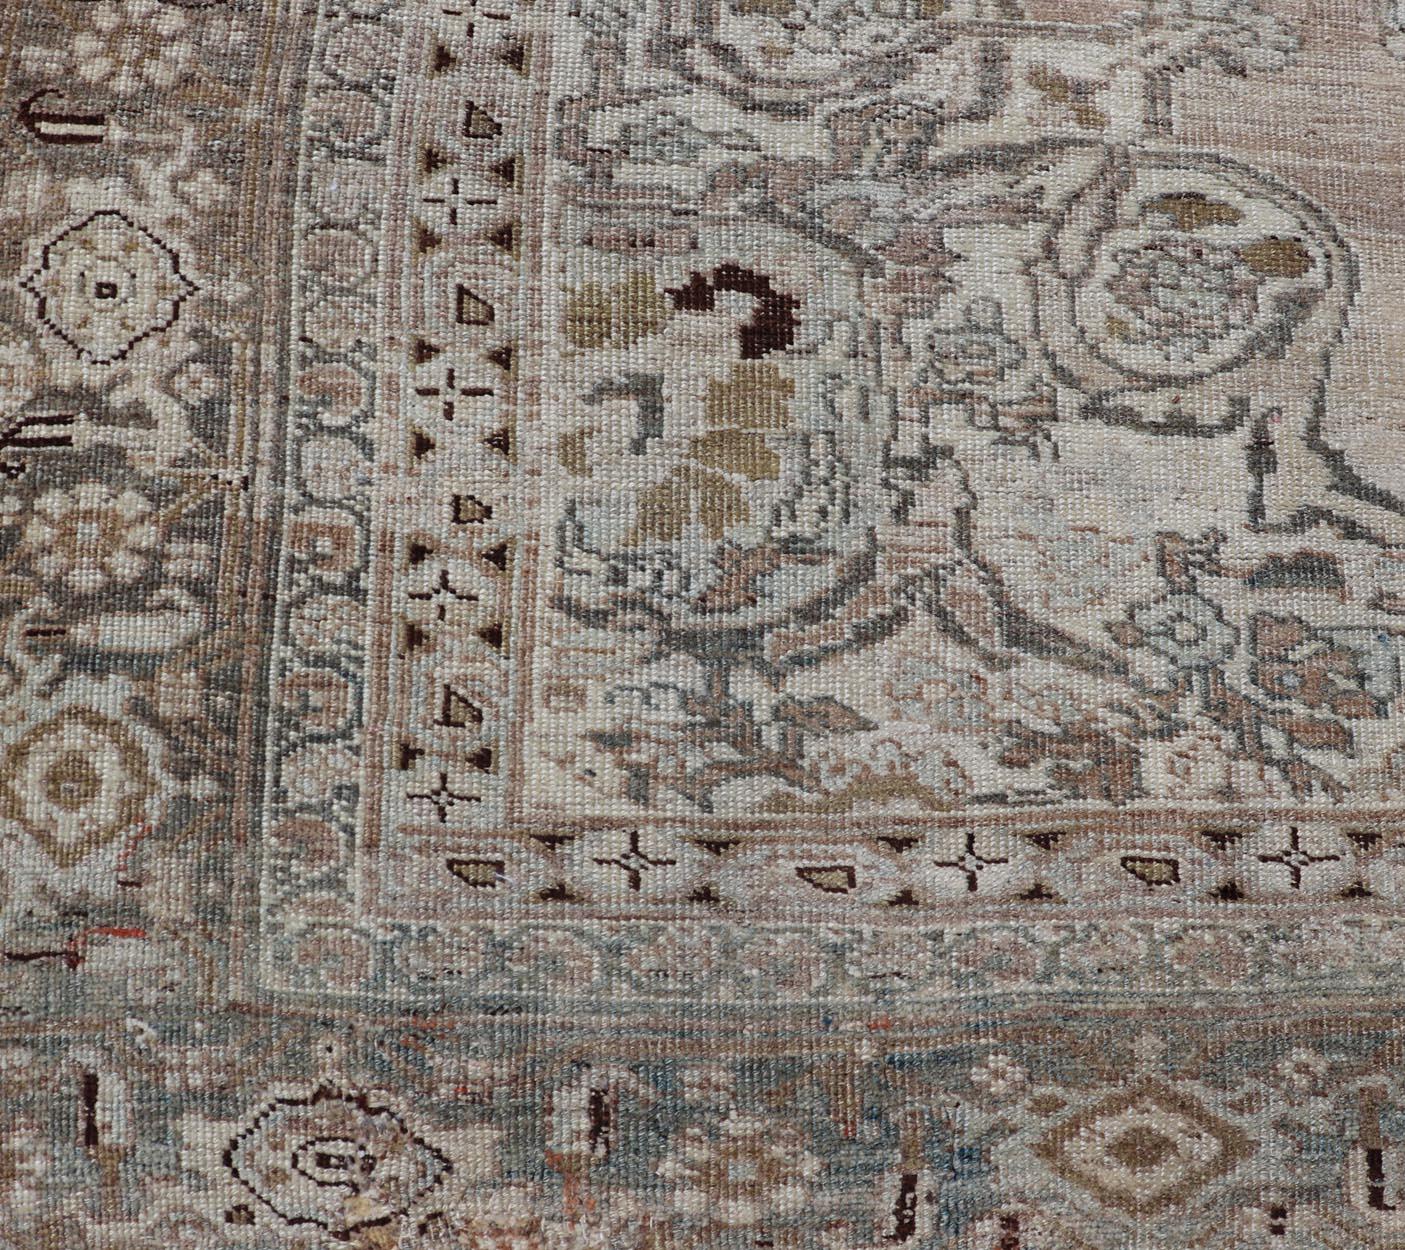 Hand-Knotted  Antique Persian Bidjar Rug with Large Floral Medallion and Vining Floral